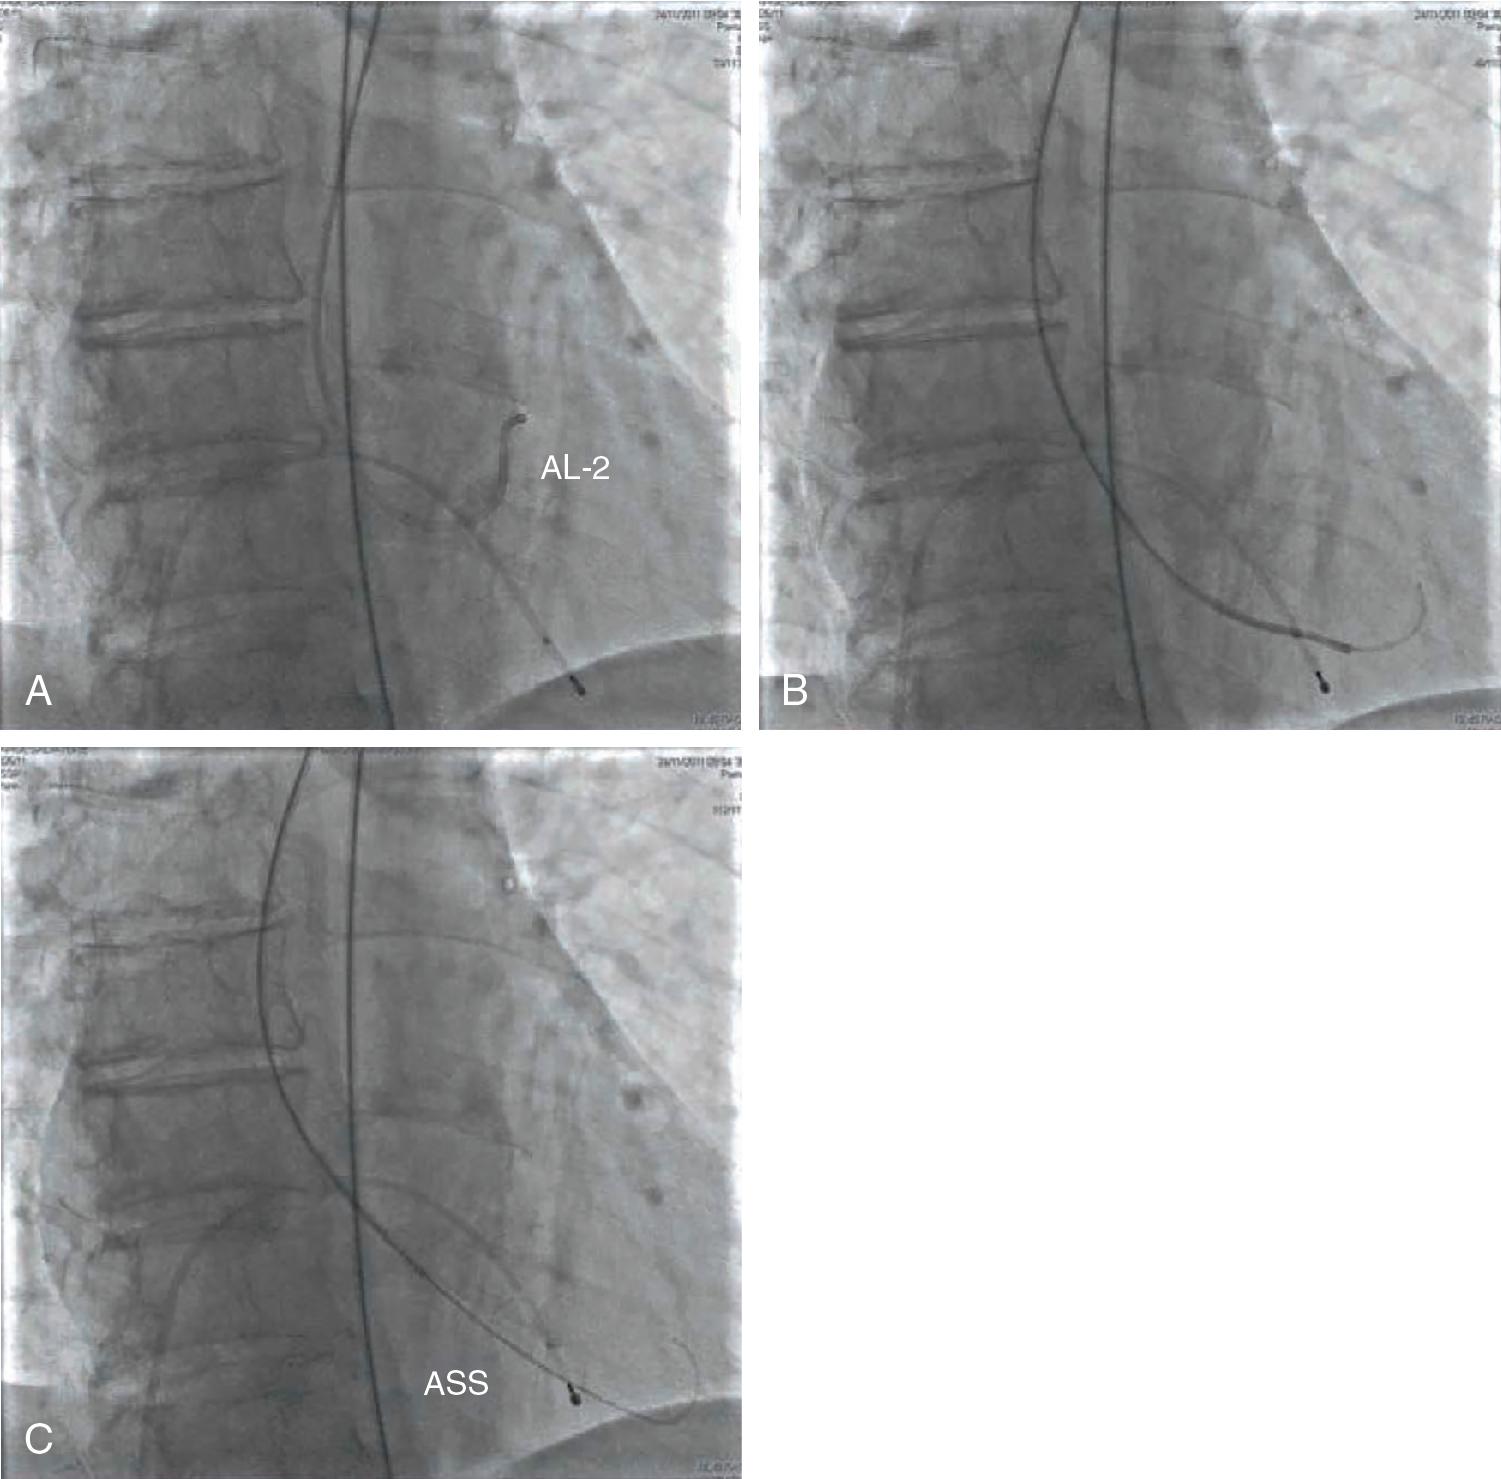 Fig. 10.8, In expert hands, after advancing the Amplatz left curve 2 catheter (AL-2) into the left ventricle (LV) (A), exchange the straight-tip guidewire for the Amplatz Super Stiff (ASS) guidewire (B). Using a right anterior oblique projection, position it in the apex of the LV (C).